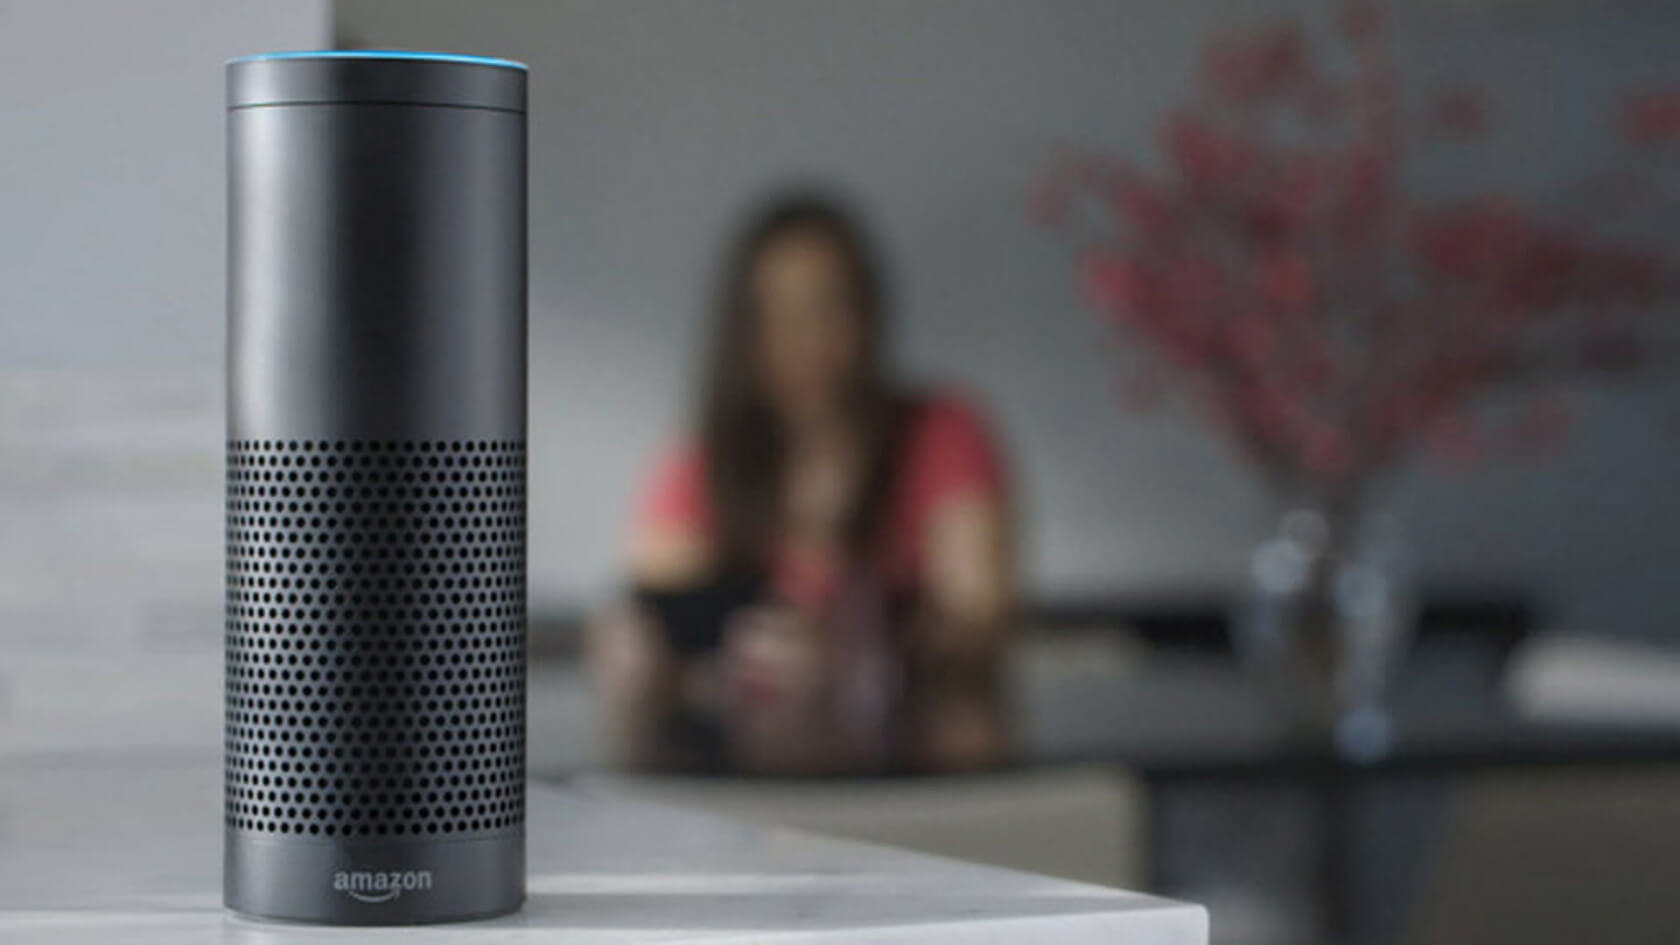 Alexa's conversational skills will be getting a boost with three new features